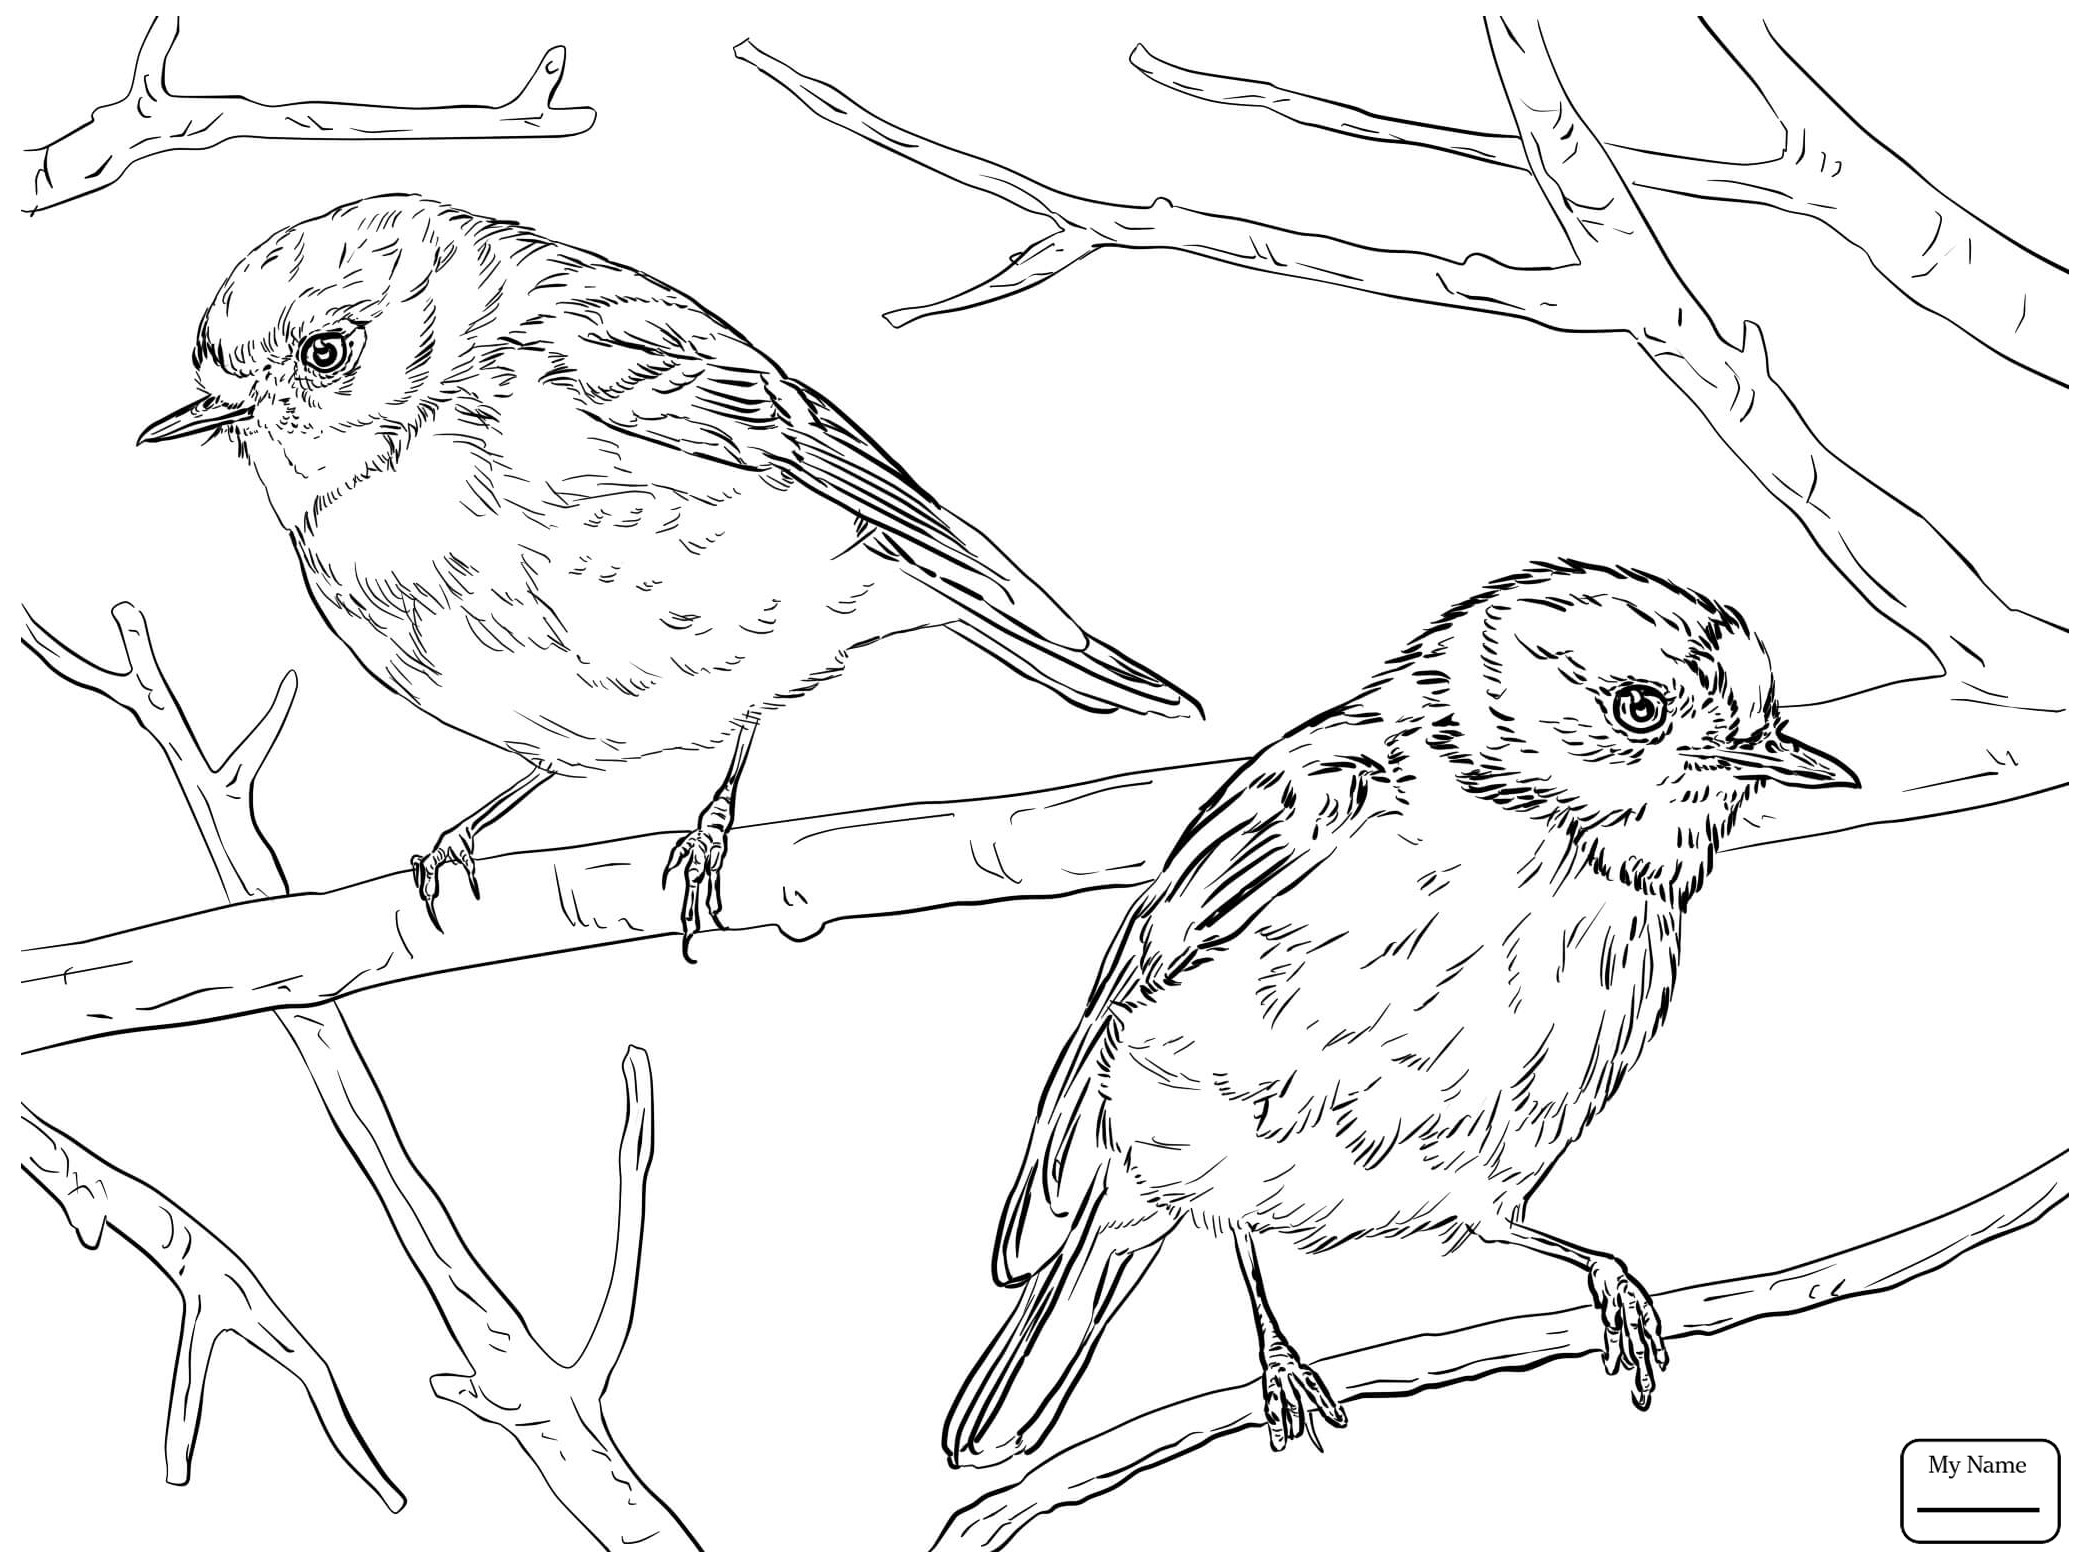 American Robin Coloring Page At Getcolorings.com | Free Printable